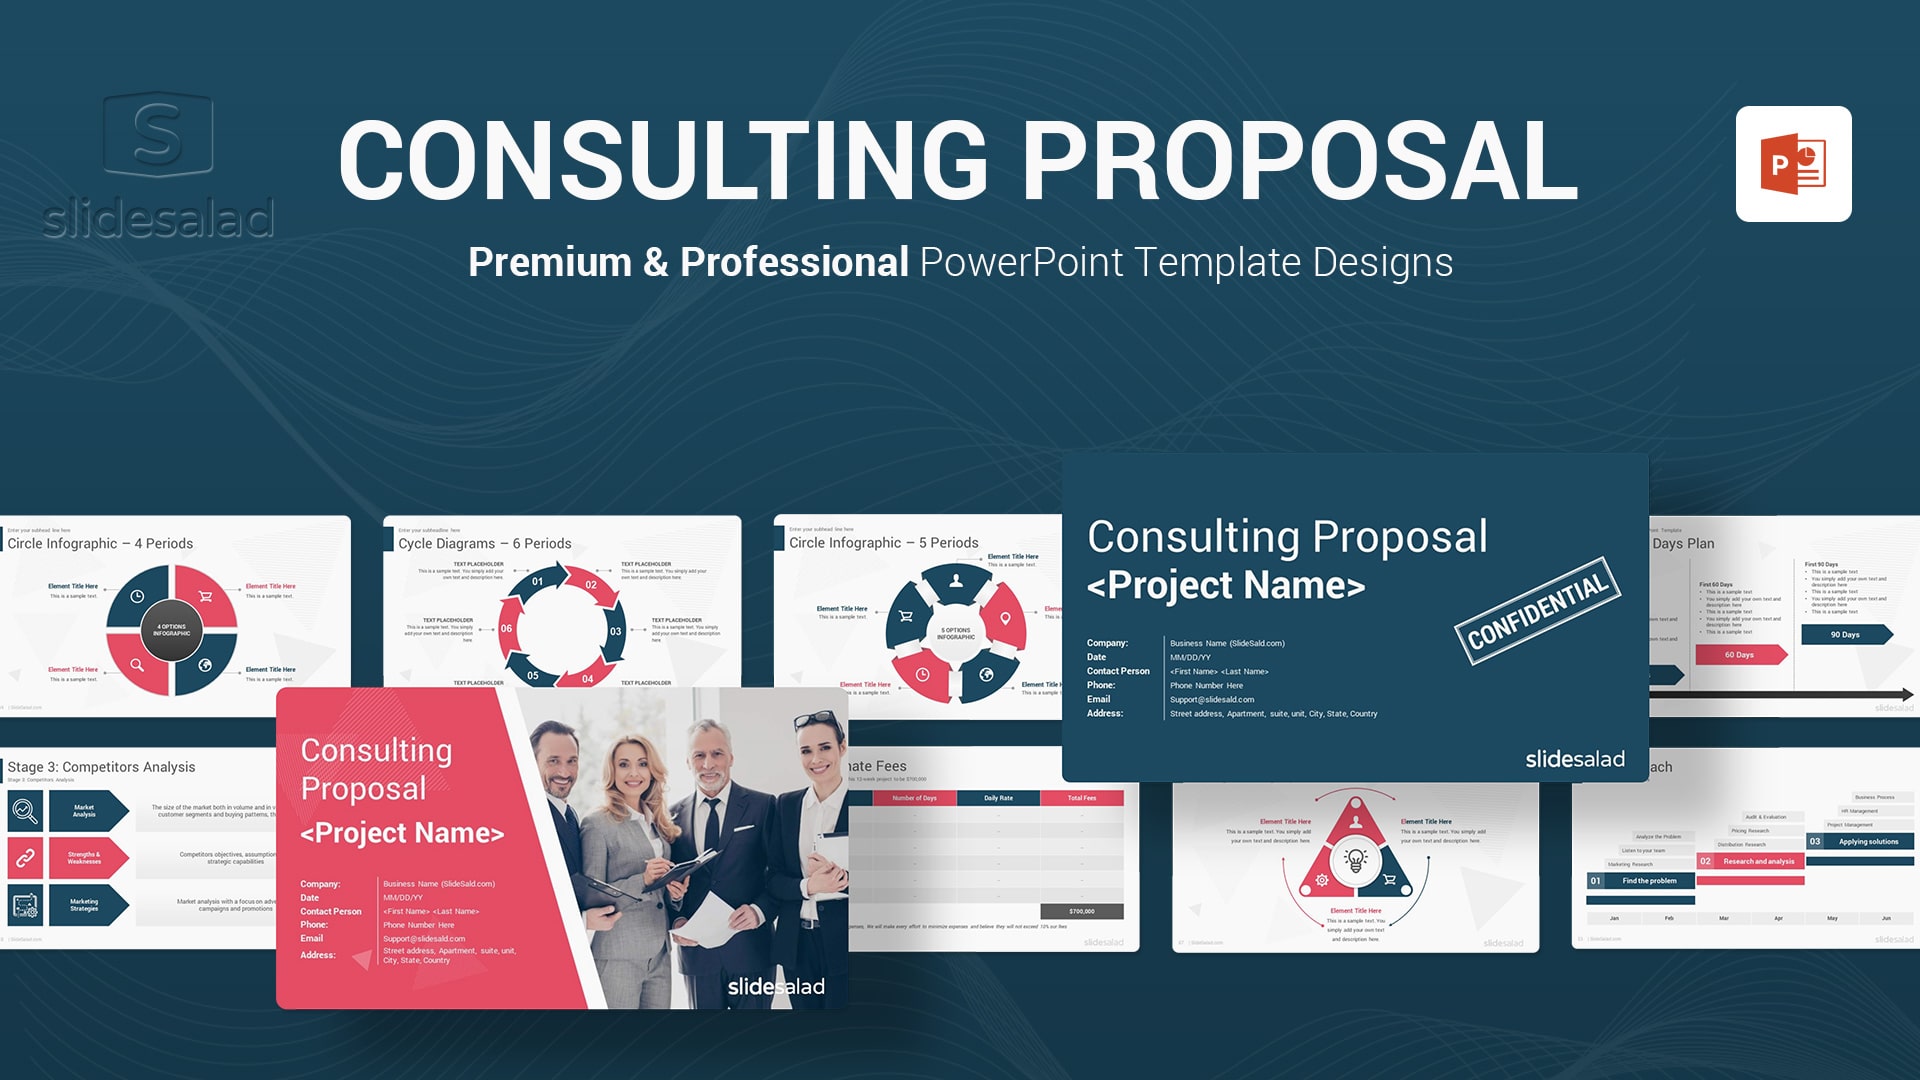 Best Consulting Proposal PowerPoint Template - Download the Best Webinar PPT Templates